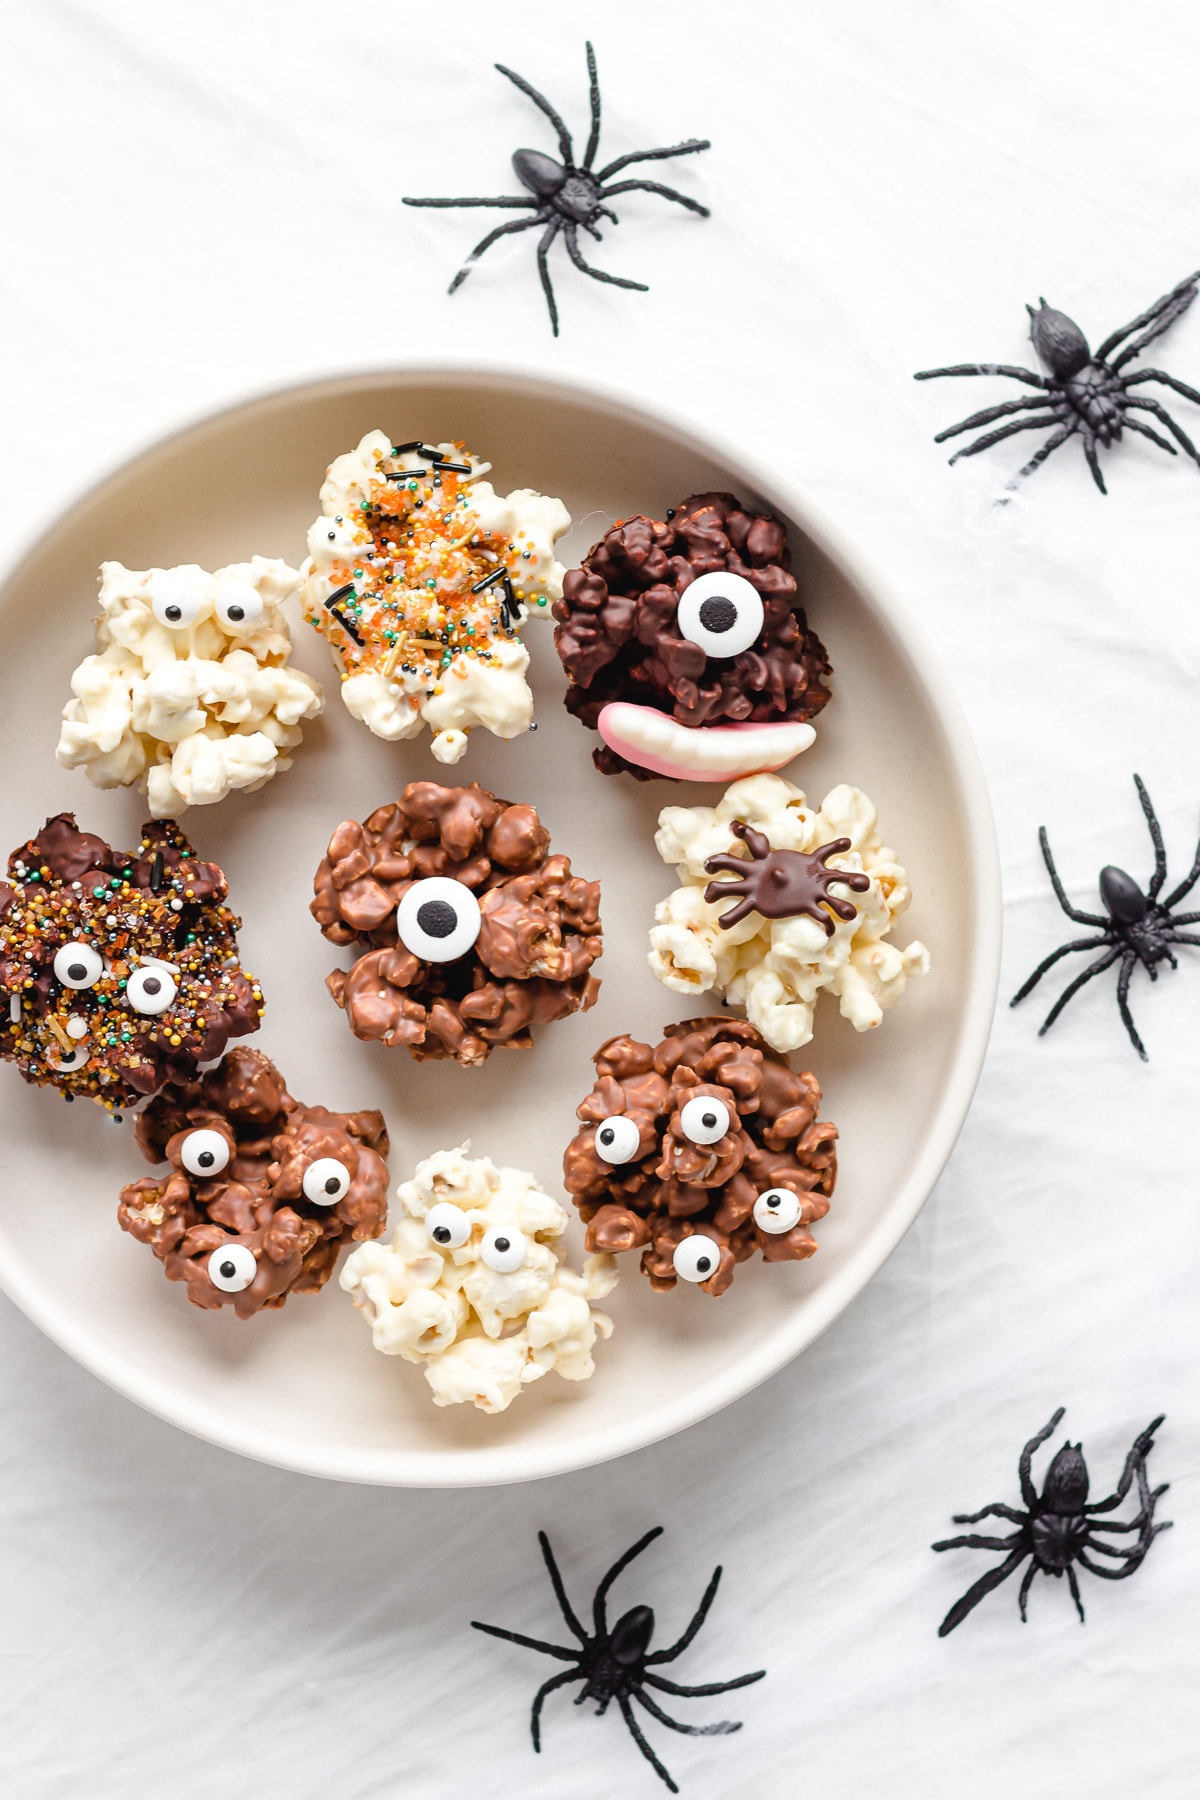 Serving platter of chocolate Halloween popcorn balls with fake spiders crawling next to it.